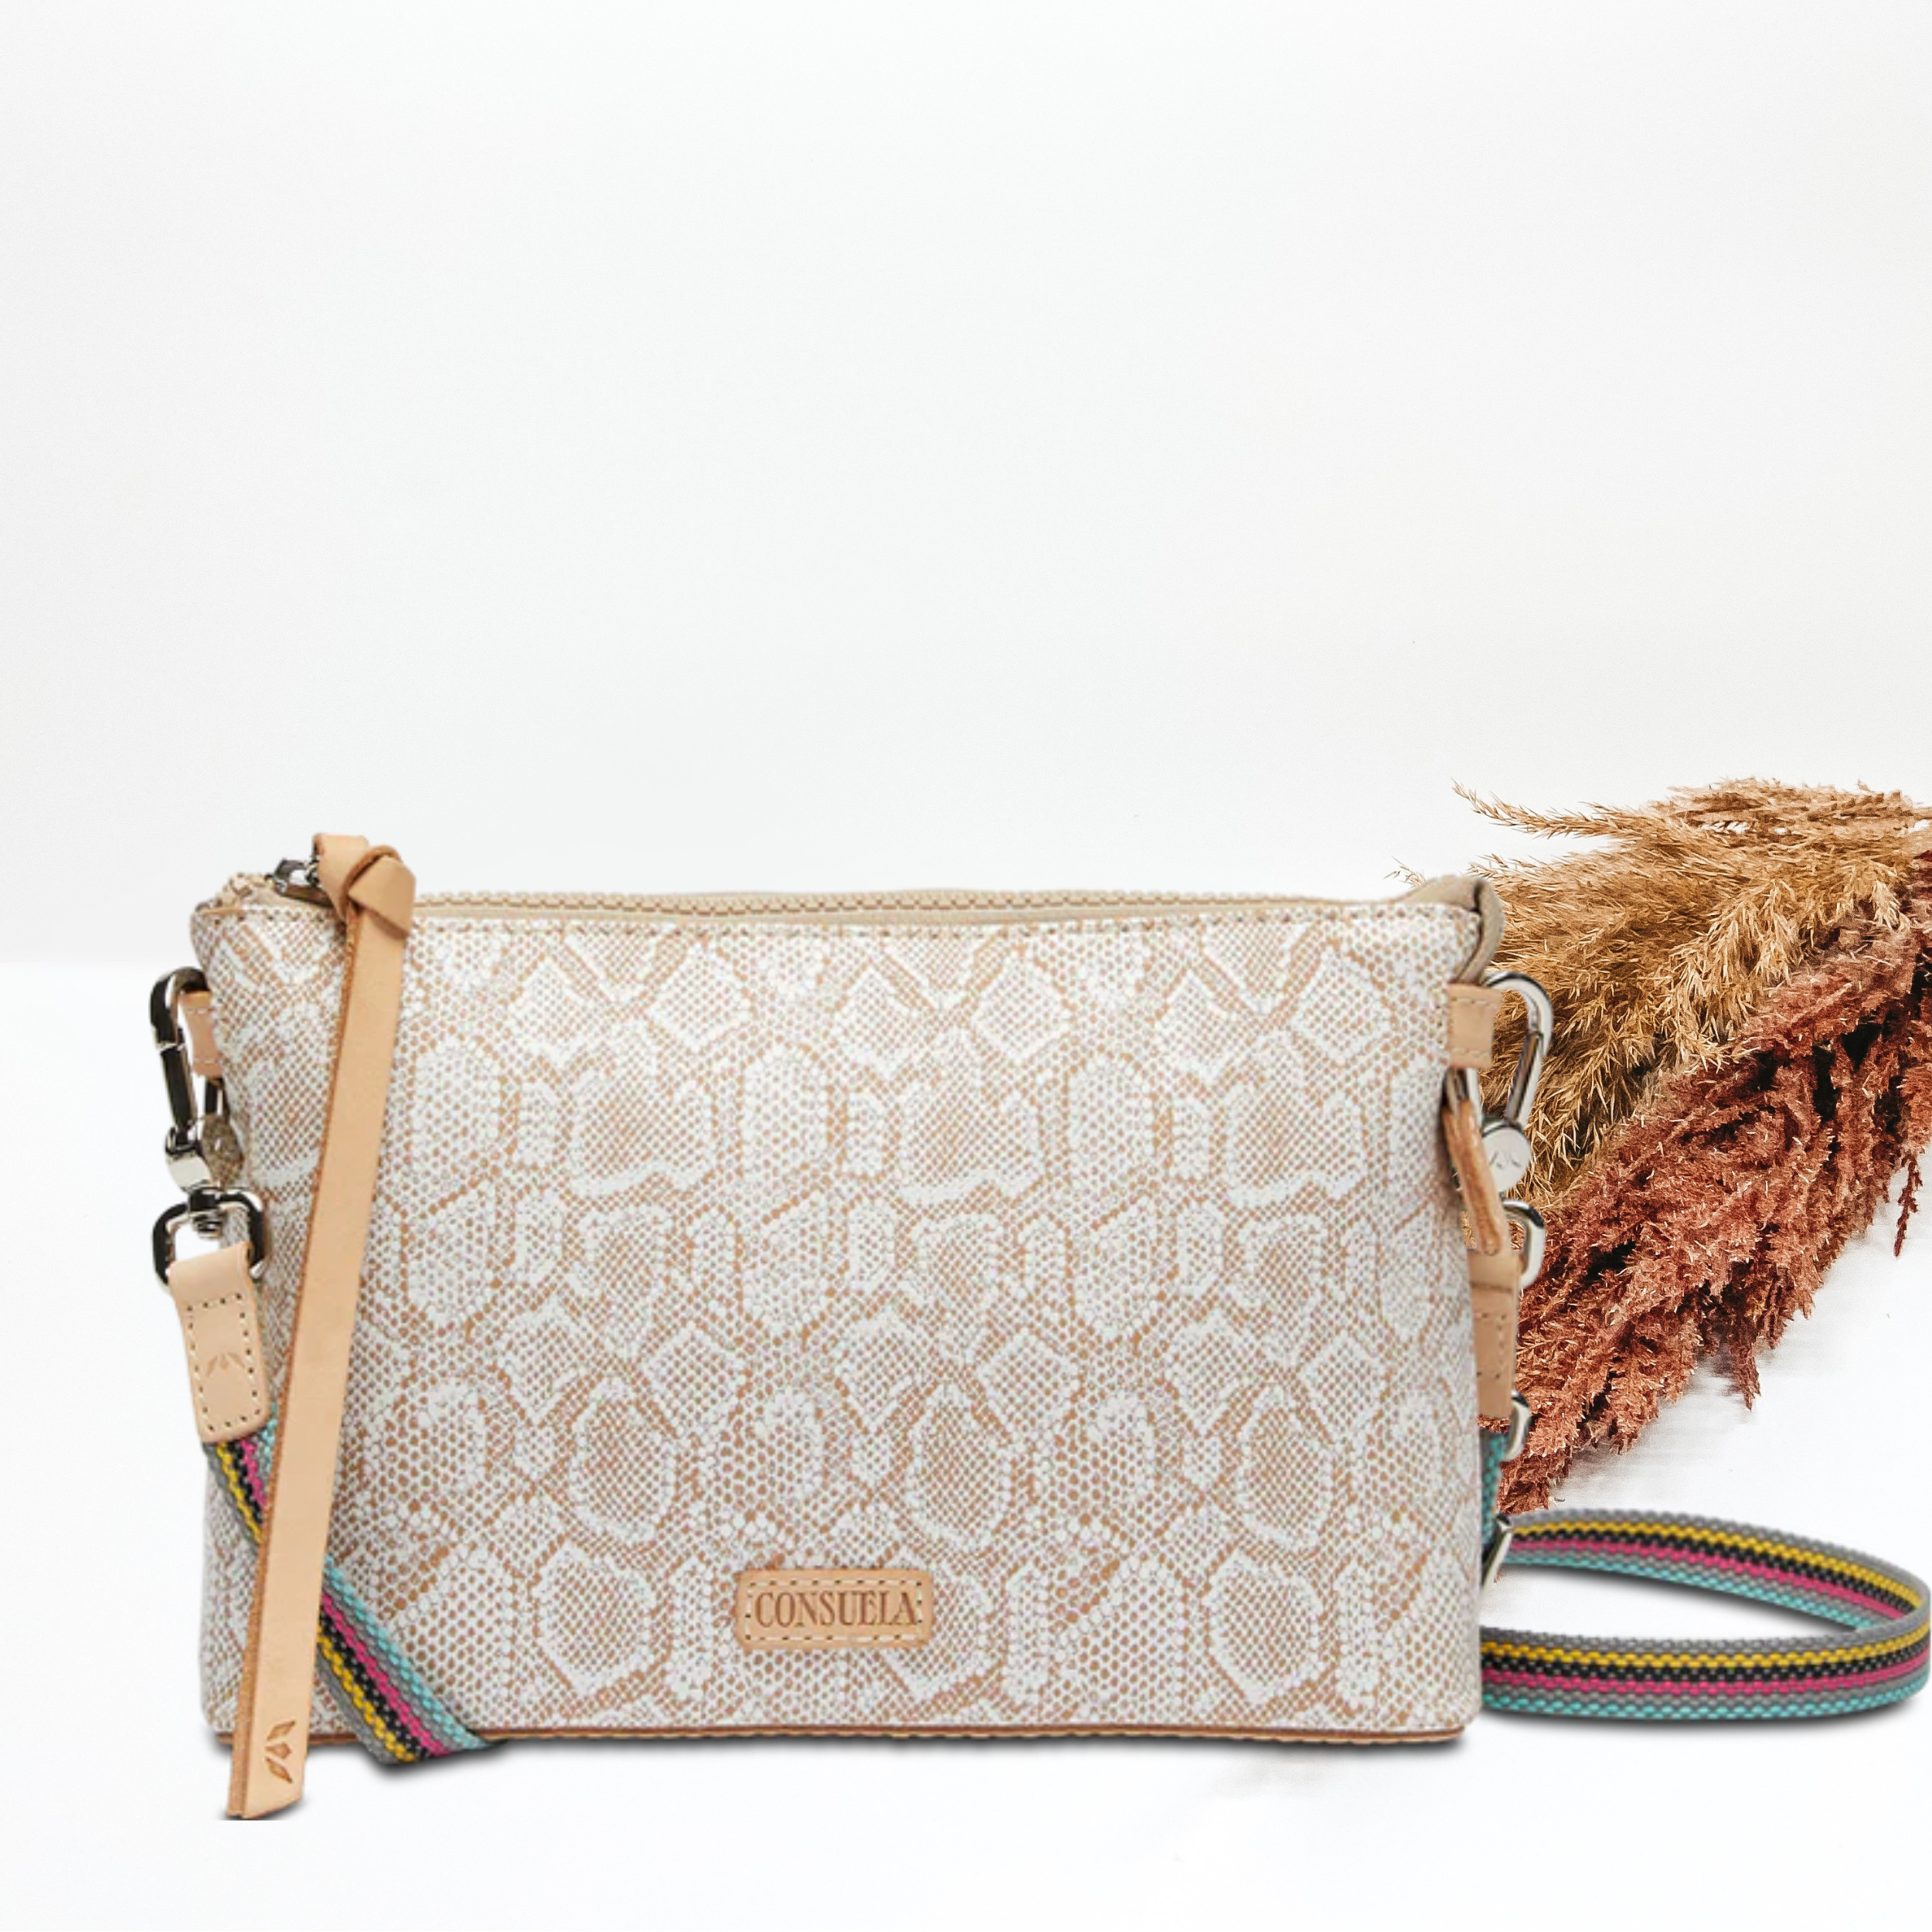 A white faux snake skin purse with a crossbody strap. Pictured on white background with brown pompous grass on the right side. 